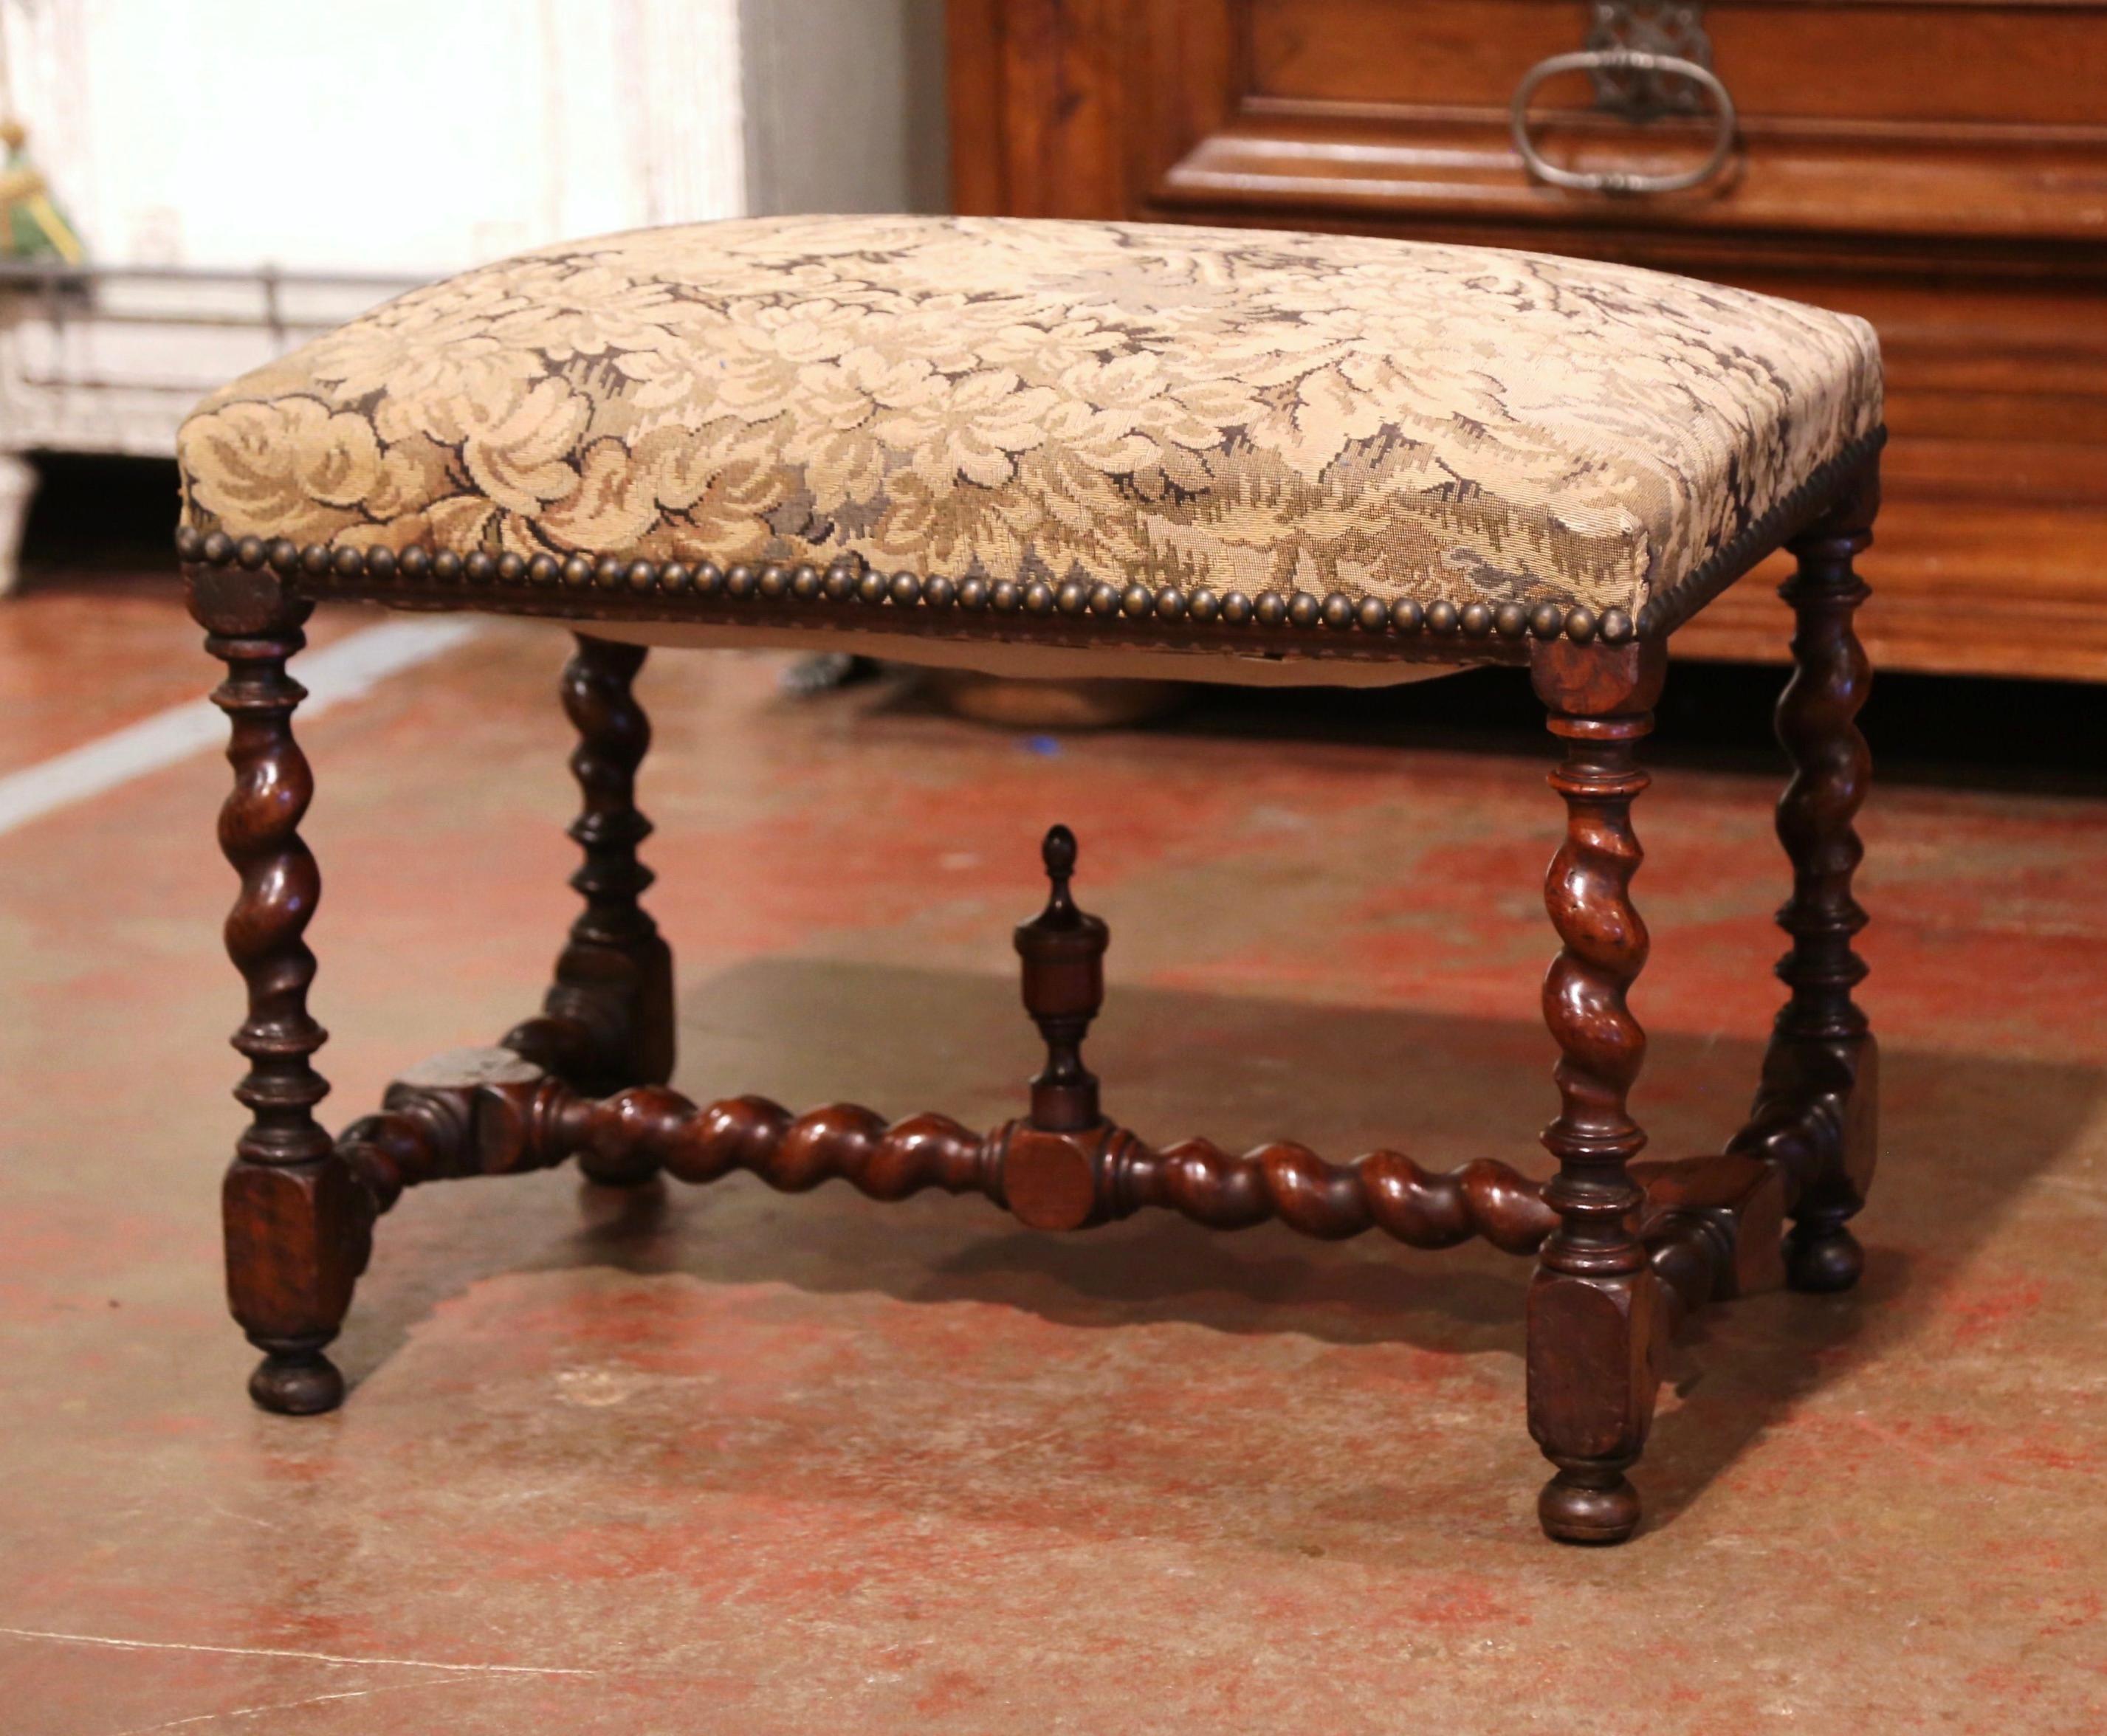 Add extra seating to a hallway, den or living room with this elegant, antique bench. Crafted in France circa 1860, this fruit wood piece features four delicately carved barley twist legs over a matching stretcher, embellished with a central finial.